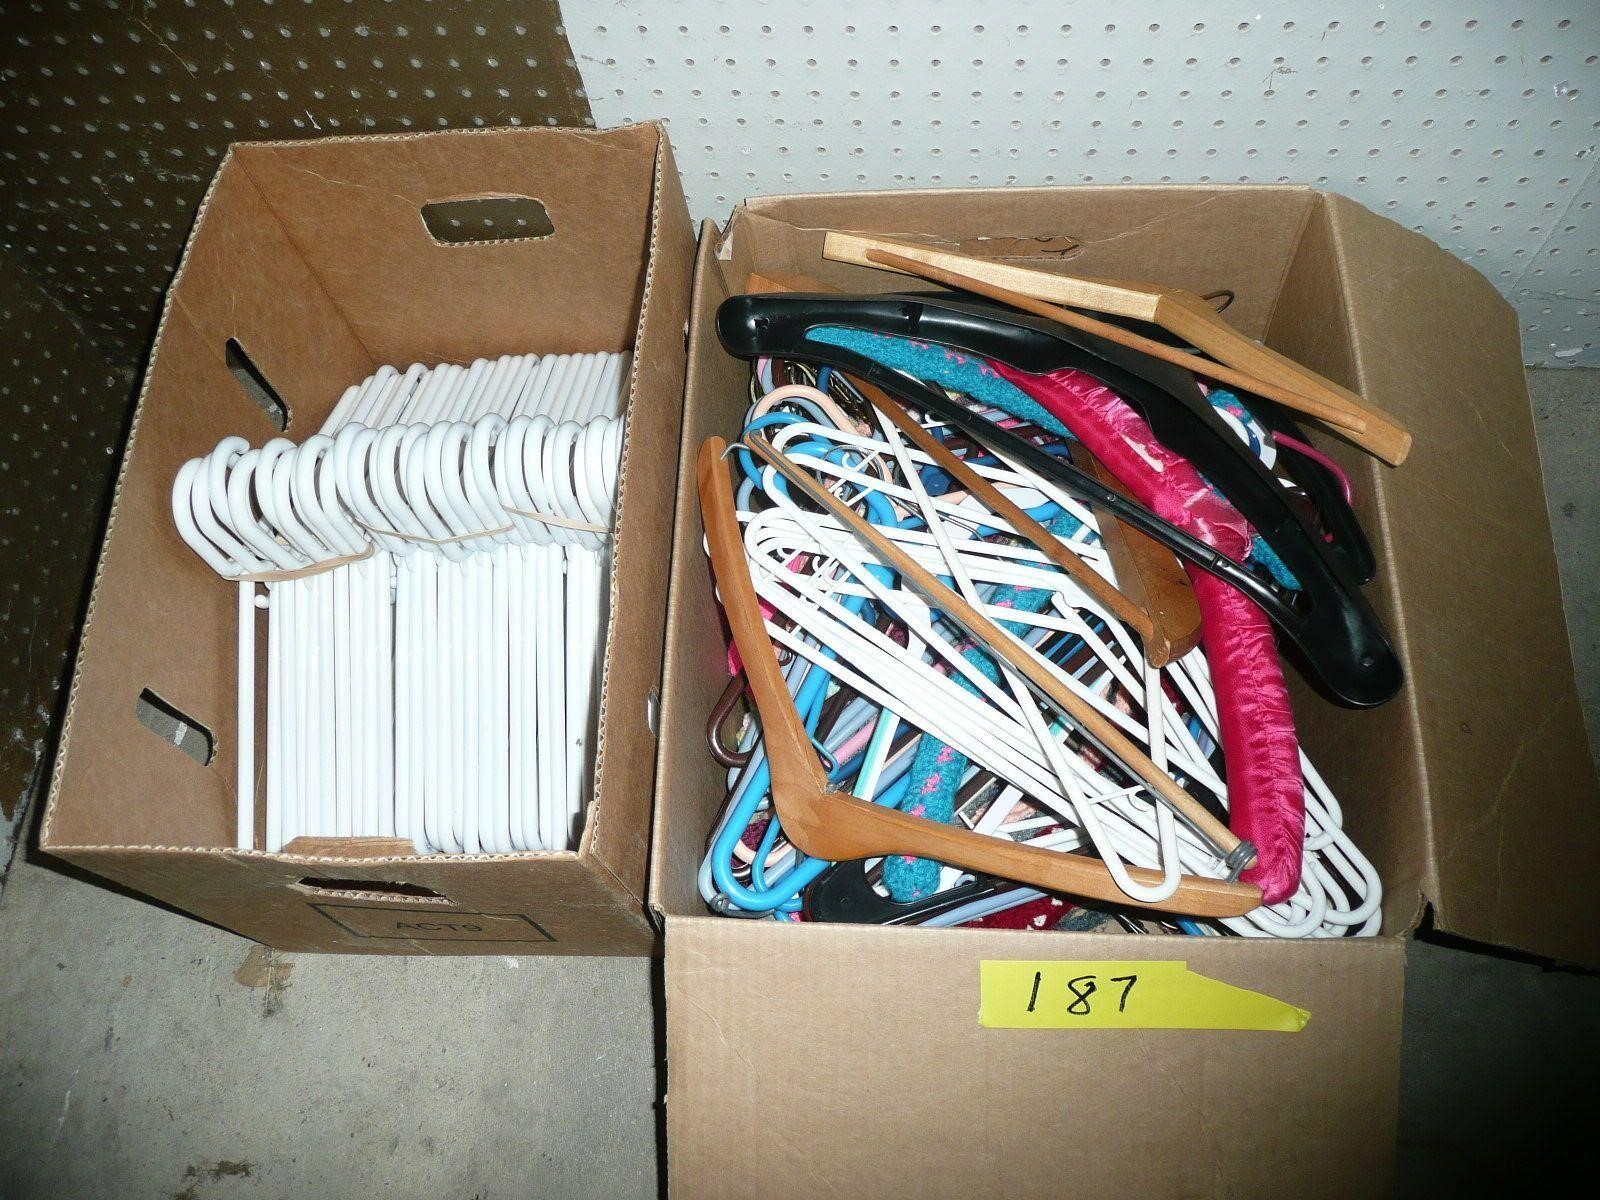 Boxes of Clothes Hangers